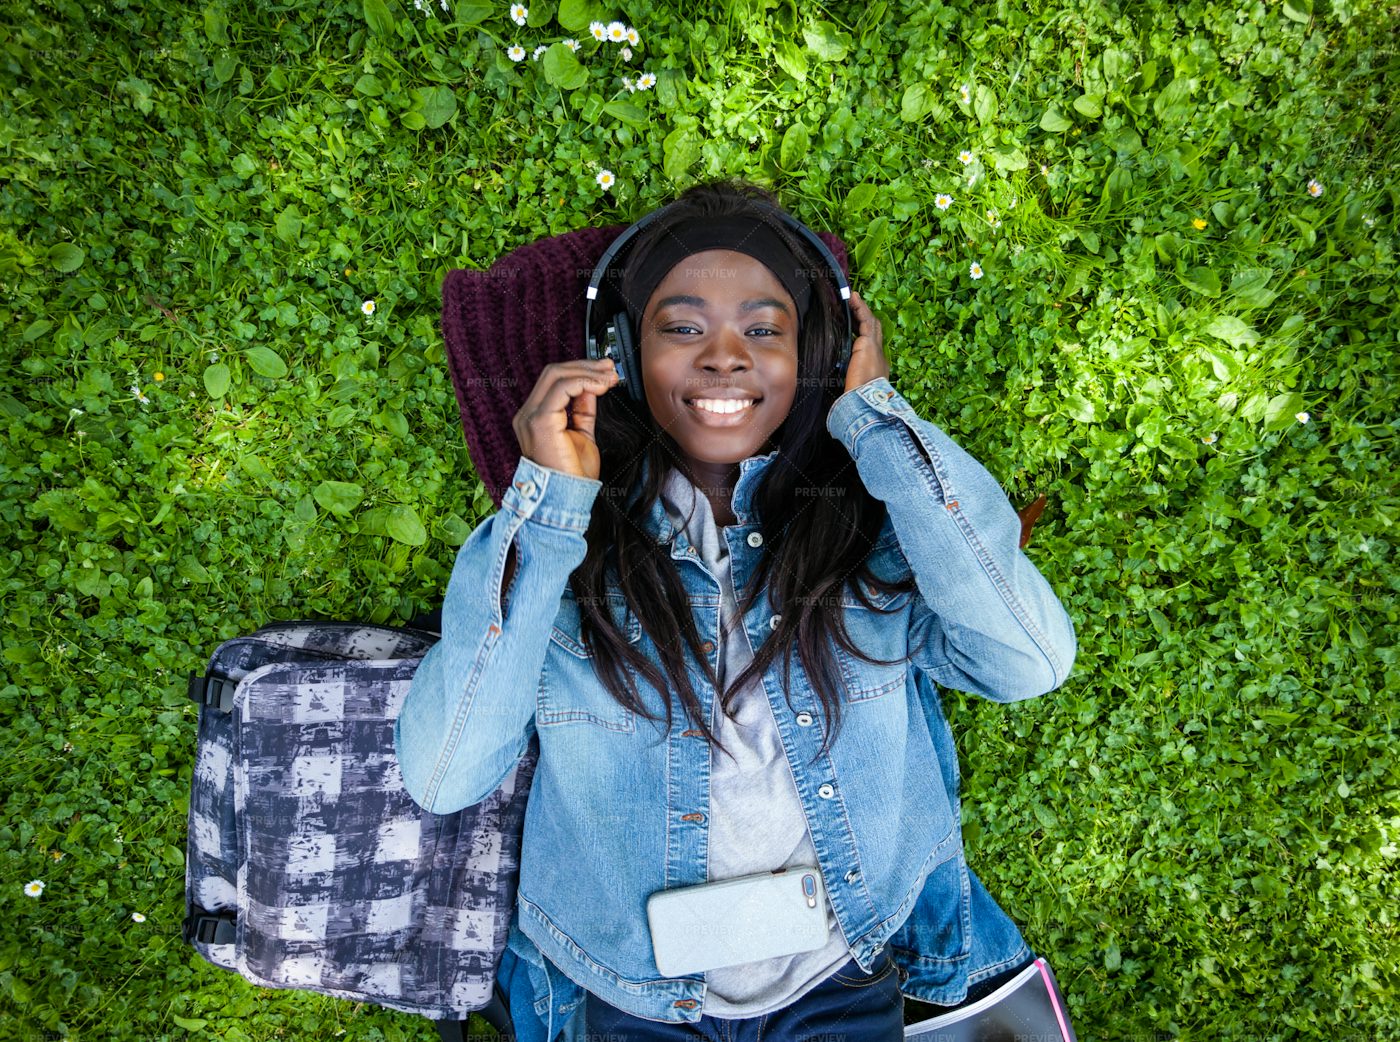 Listening To Music In The Park: Stock Photos